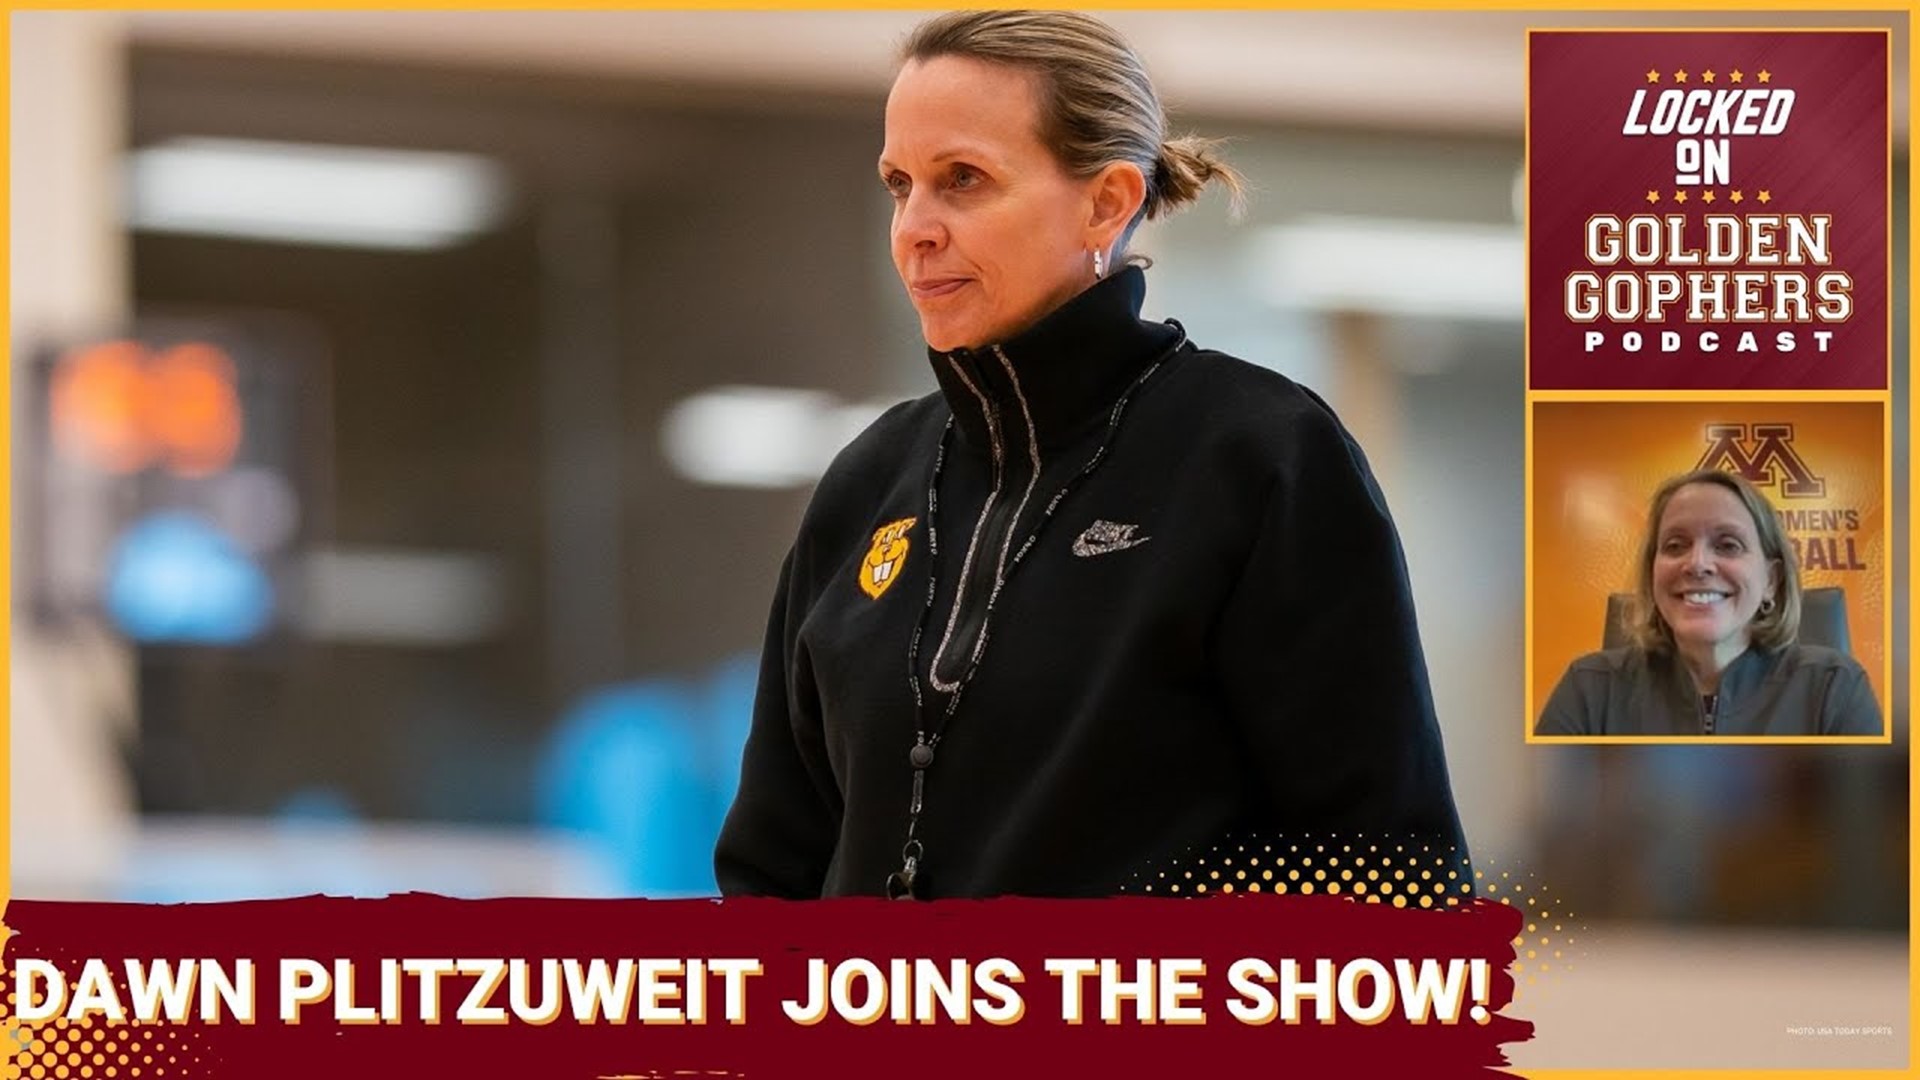 On today's show we are joined by Gophers Women's Basketball head coach Dawn Plitzuweit! We discuss building the program, her coaching assistants and early thoughts